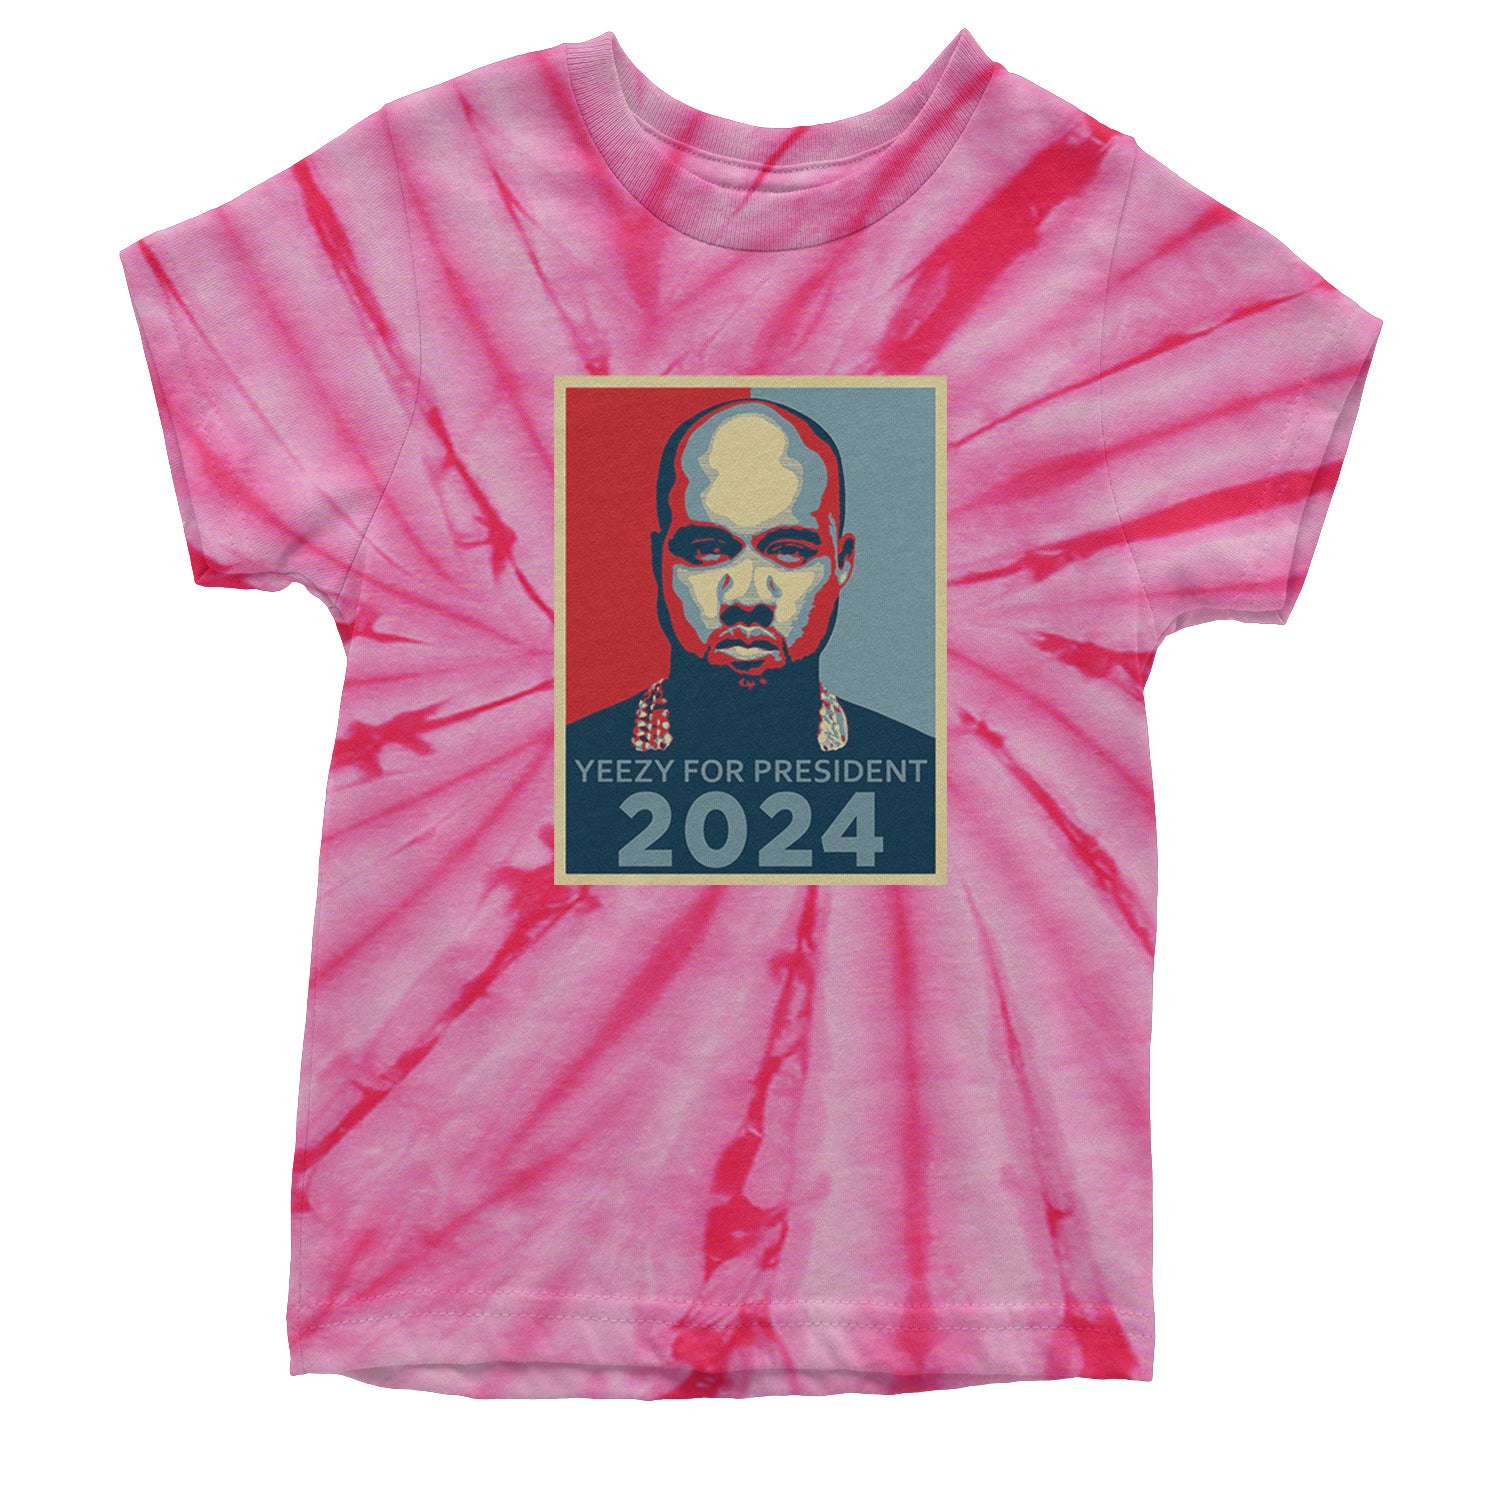 Yeezus For President Vote for Ye Youth T-shirt Tie-Dye Spider Pink